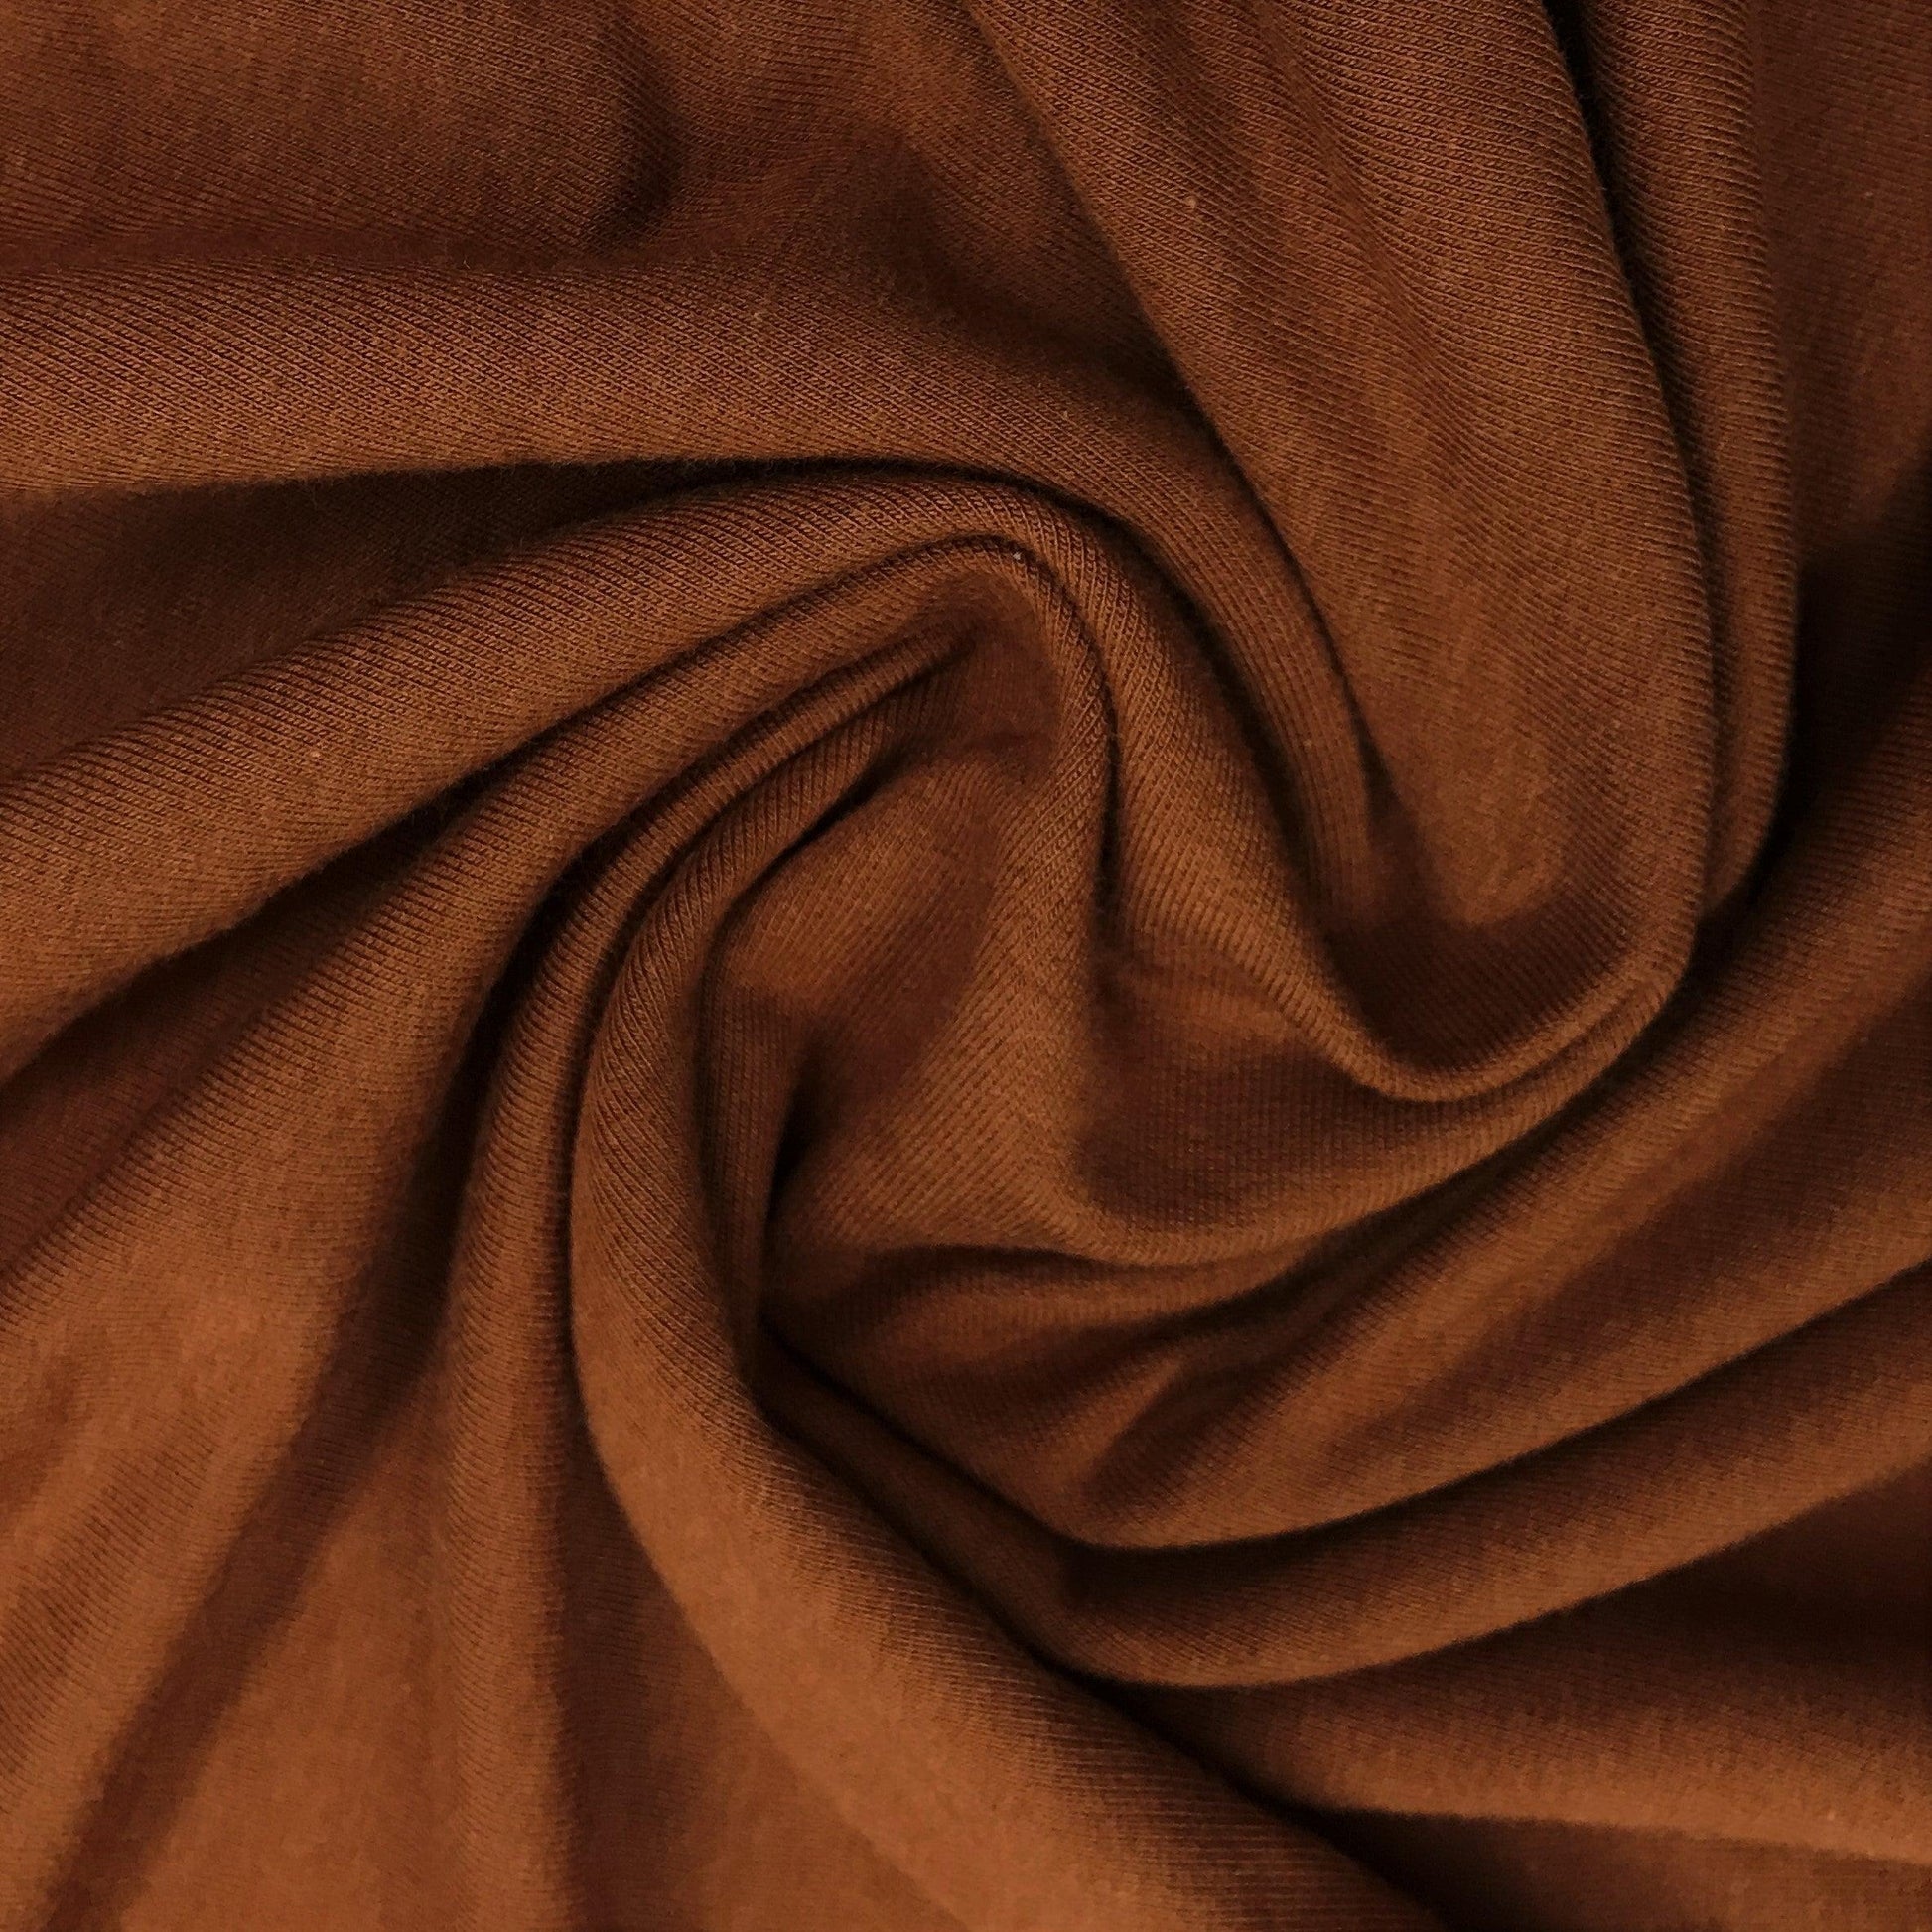 Rust Bamboo Stretch French Terry Fabric - 265 GSM, $12.86/yd, 15 Yards - Nature's Fabrics